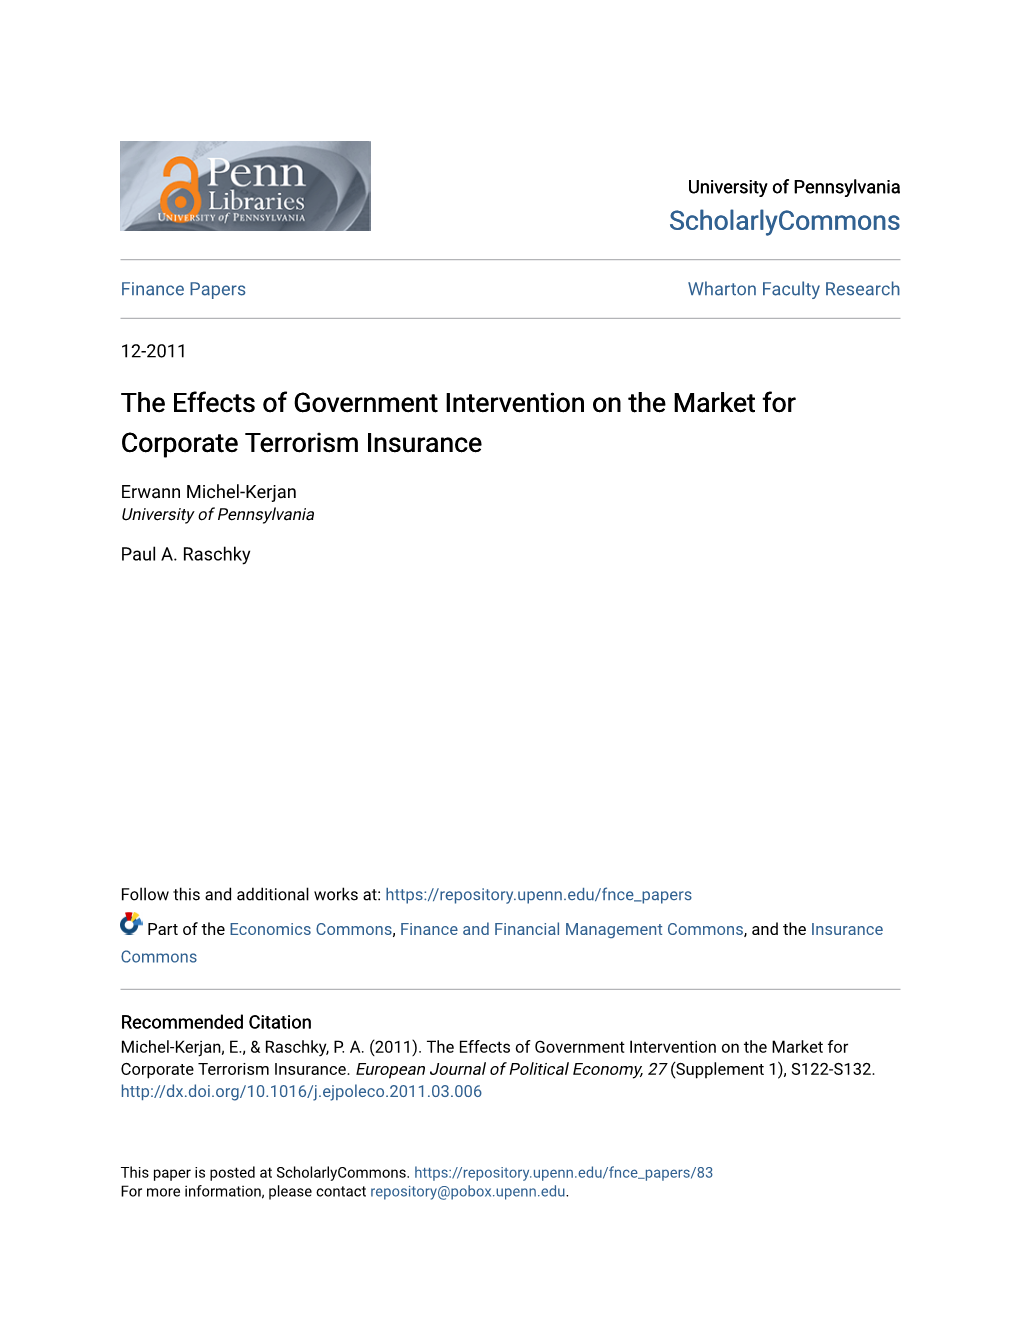 The Effects of Government Intervention on the Market for Corporate Terrorism Insurance